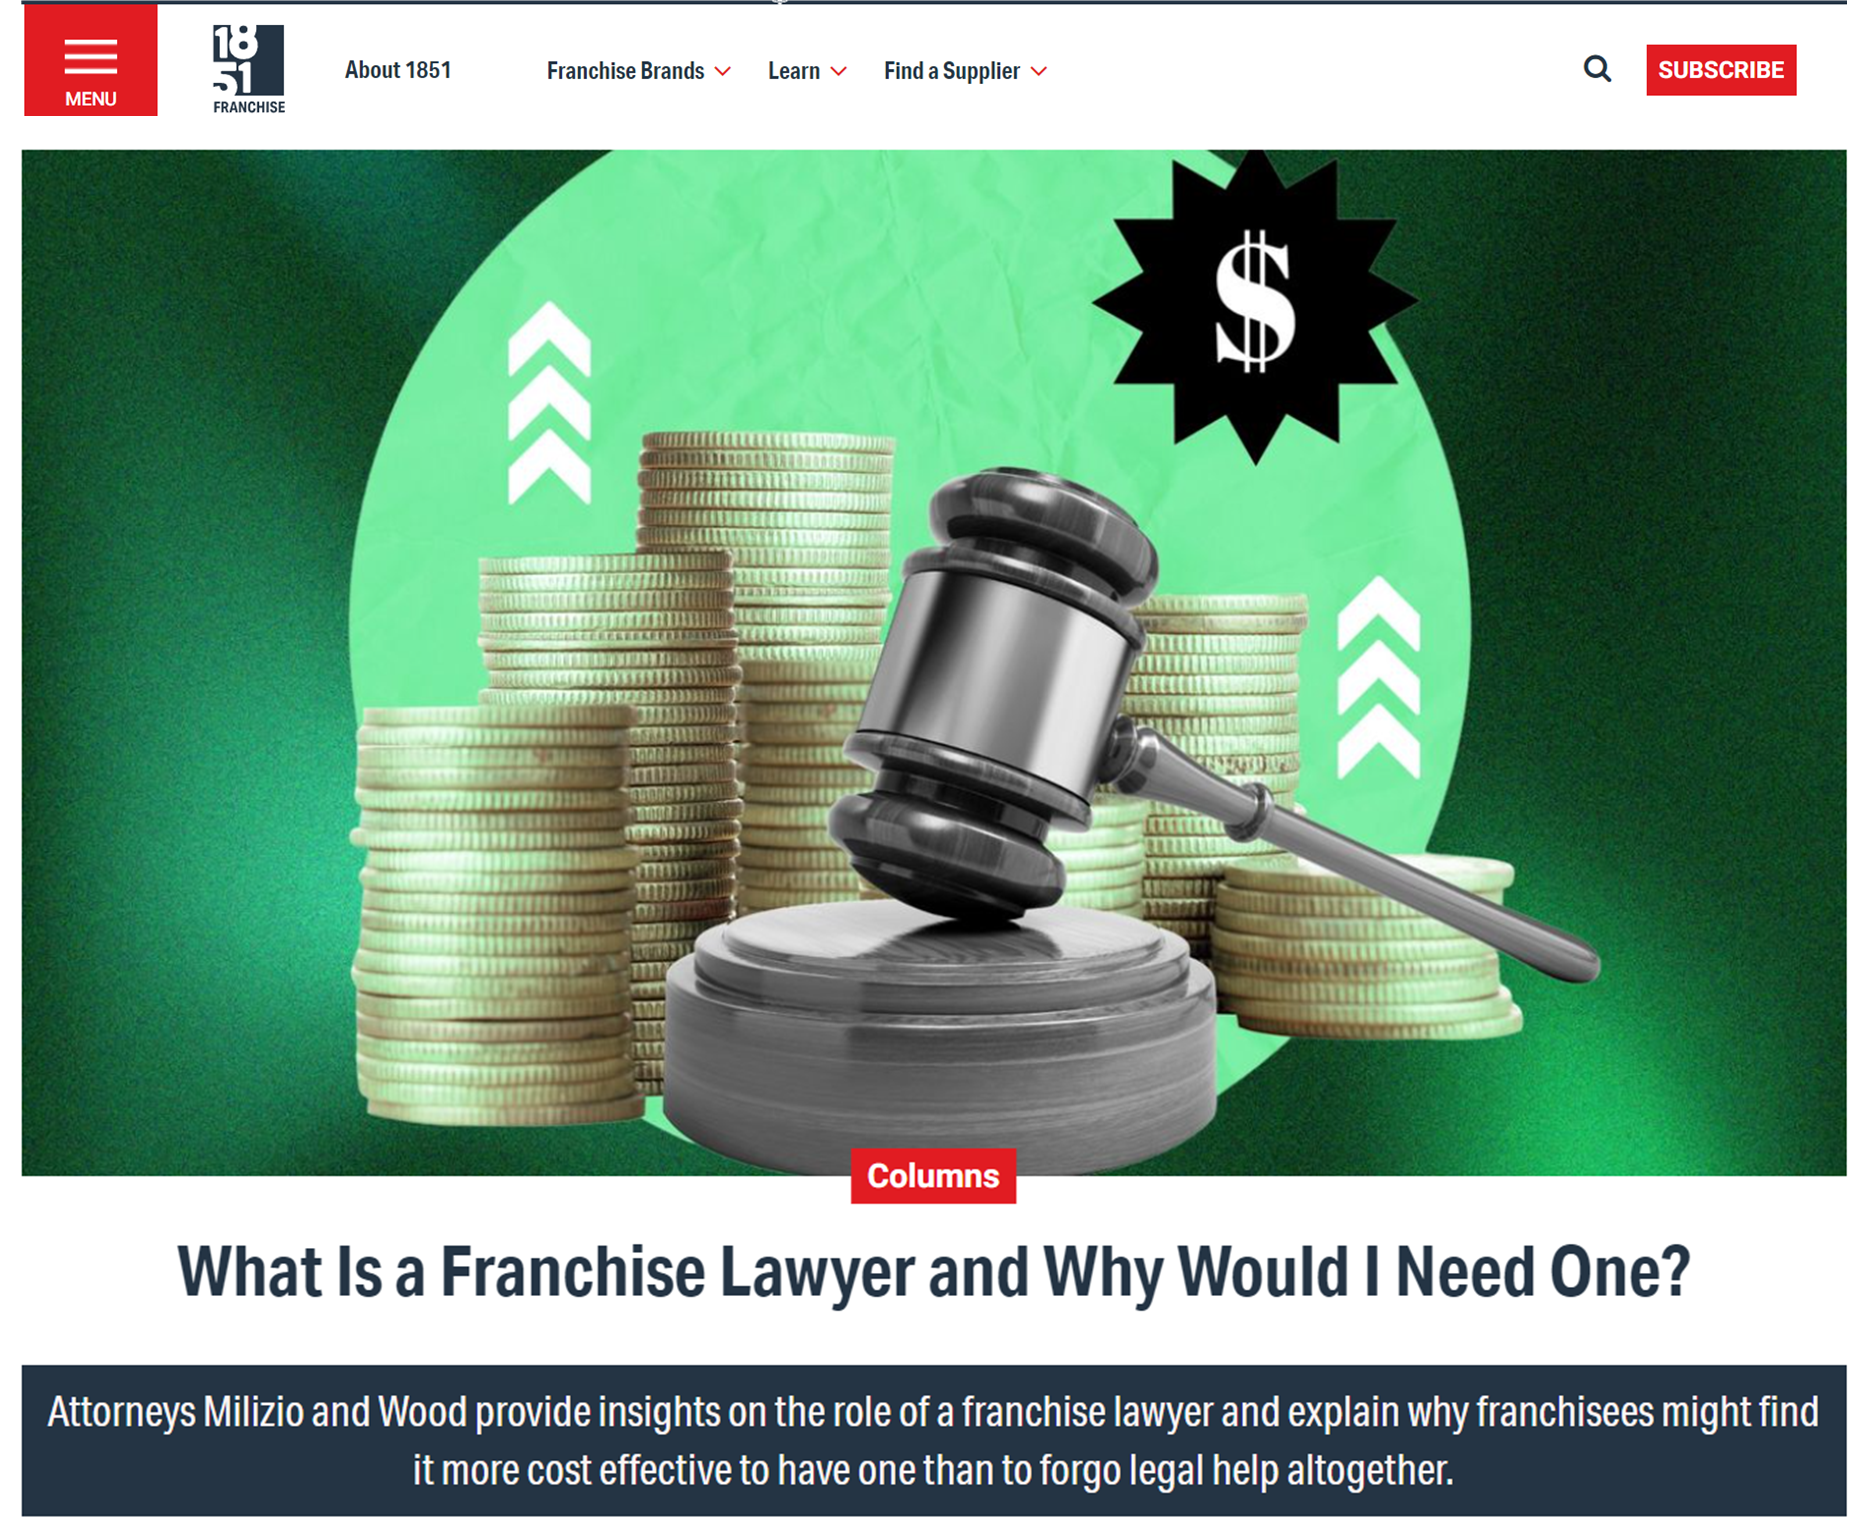 Article What is a Franchise Lawyer?